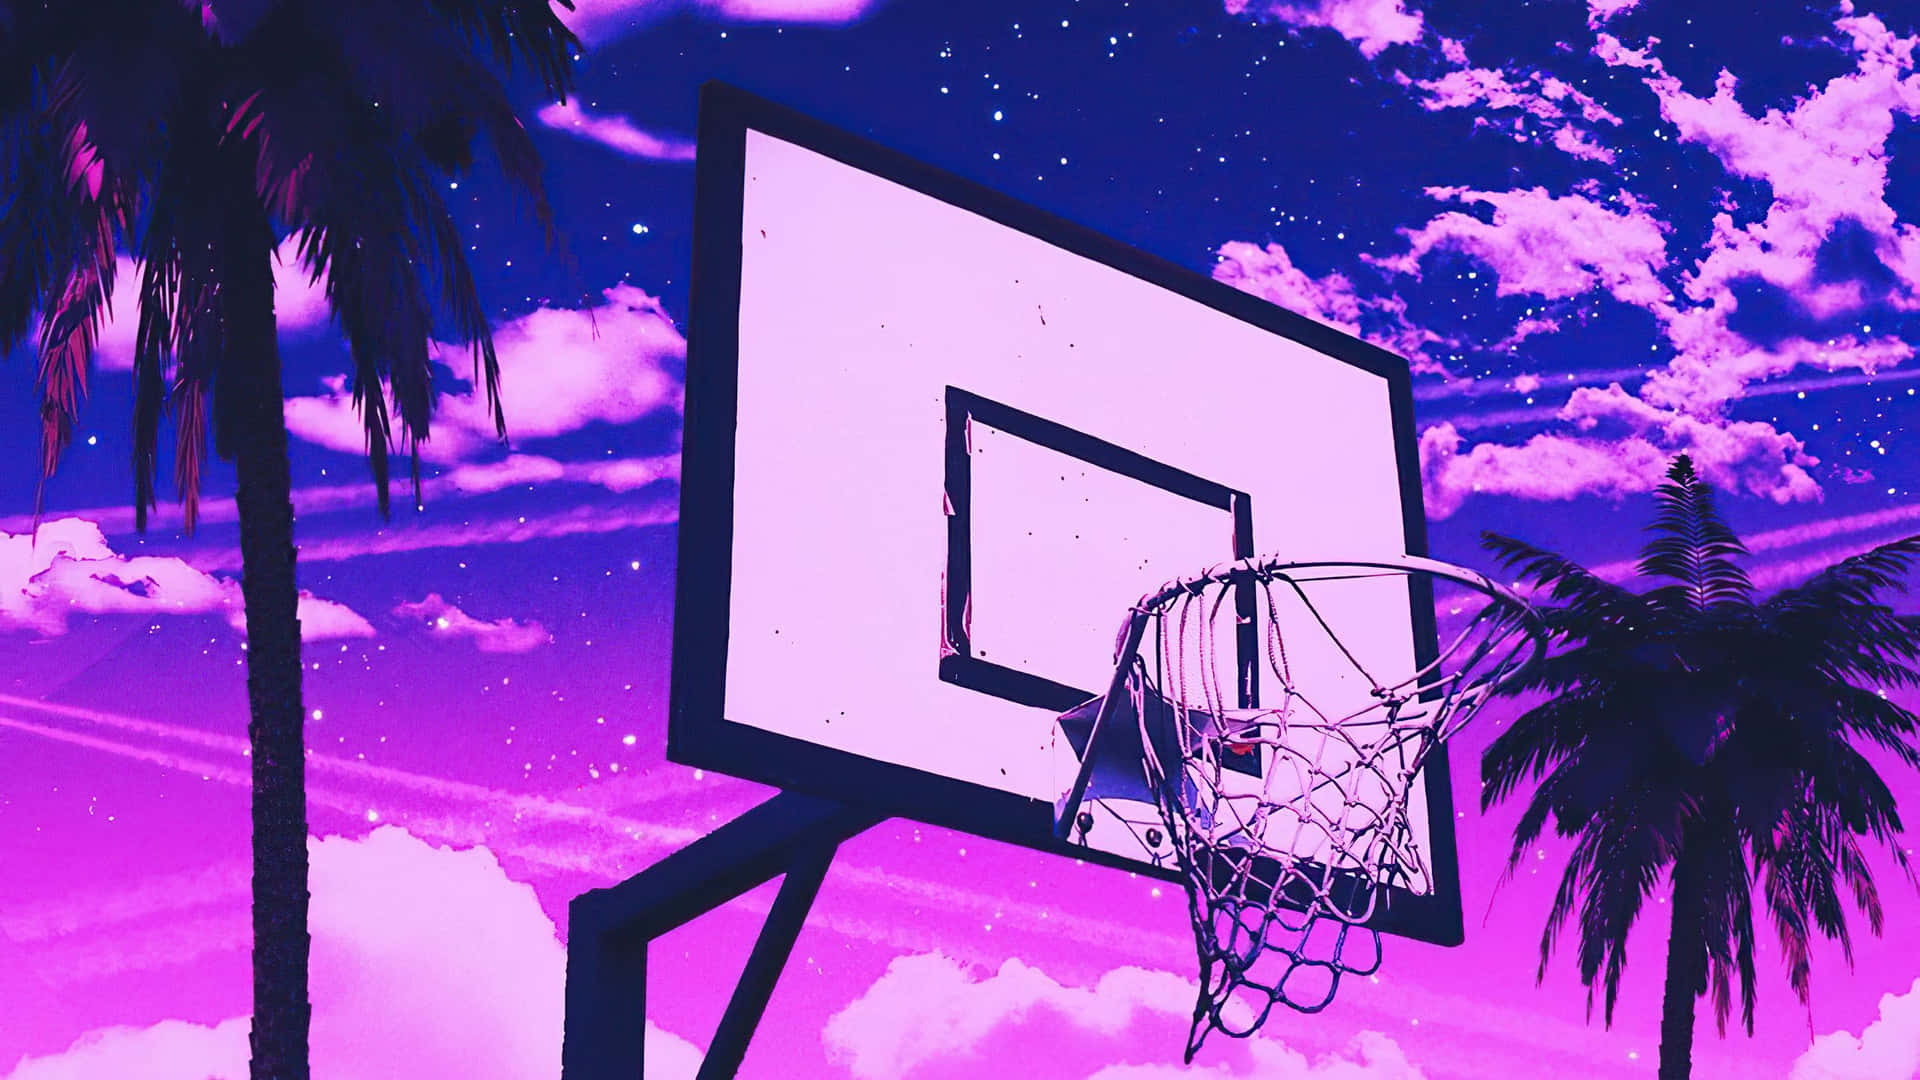 Throw A Hoop in Style With A Pink Basketball Wallpaper